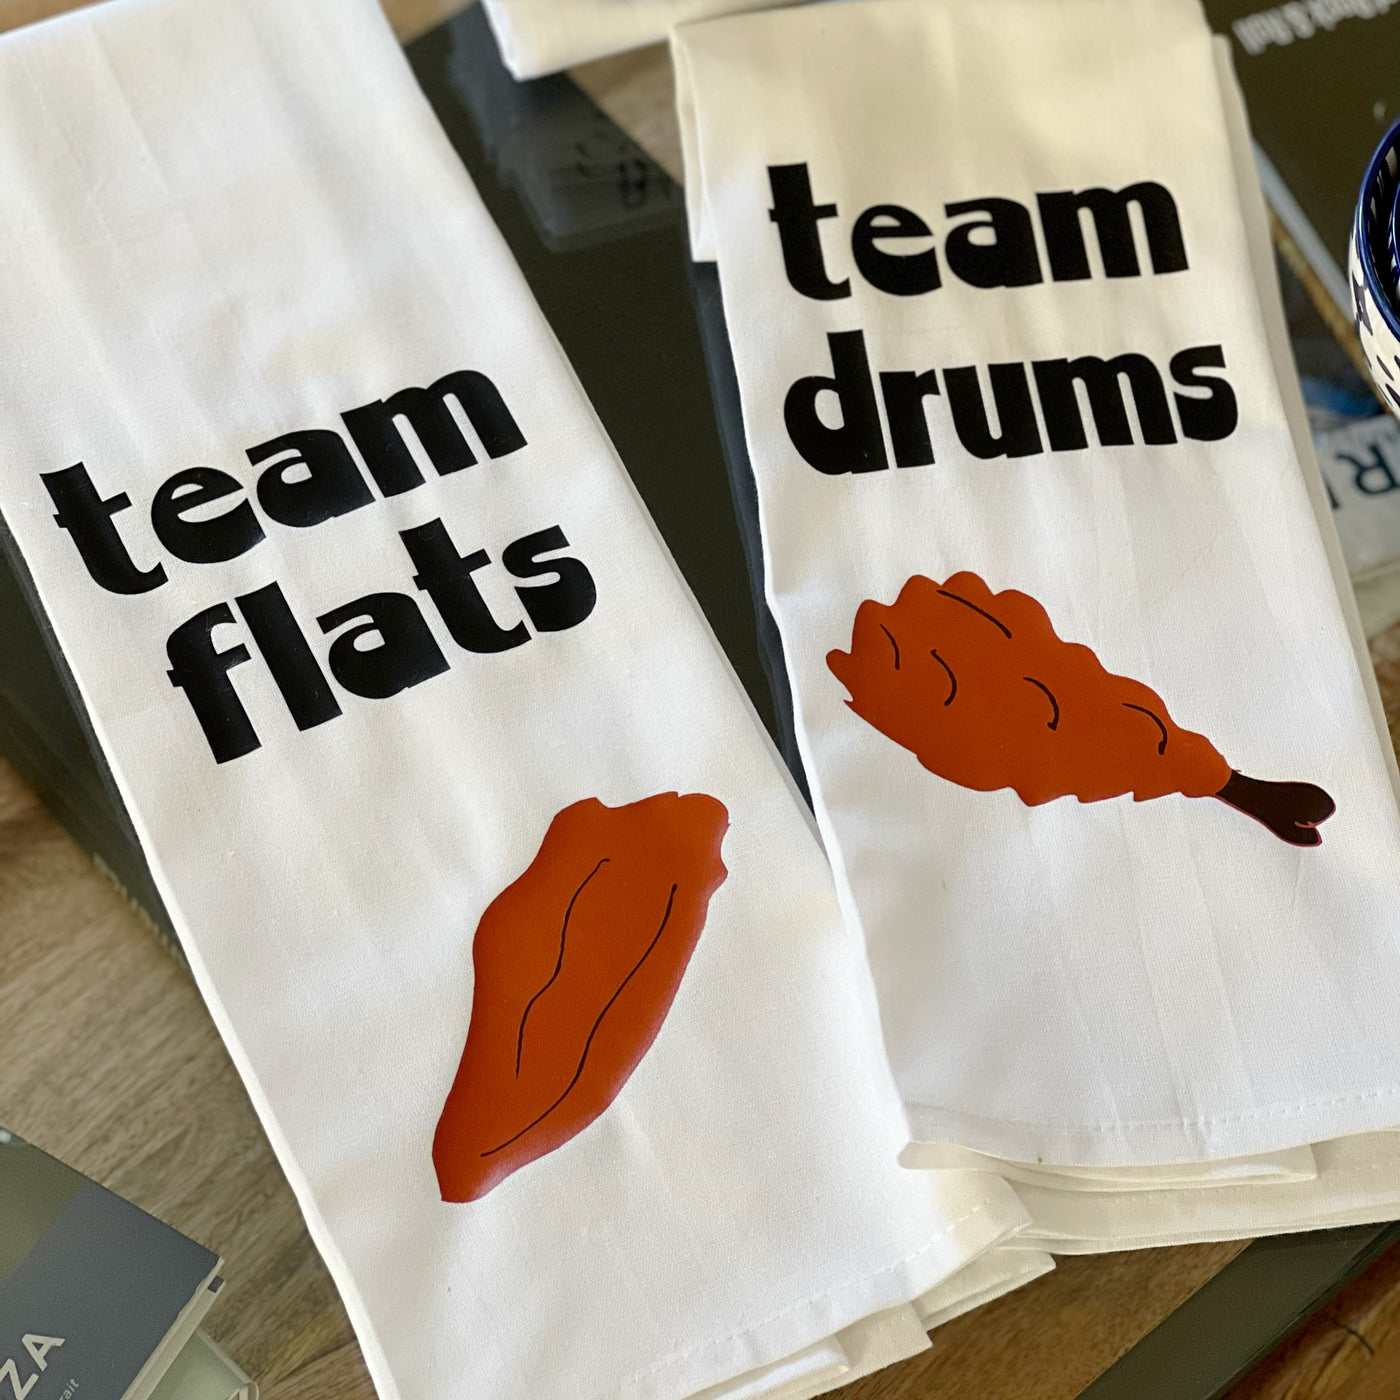 flats or drums? - humorous bar kitchen towel LG